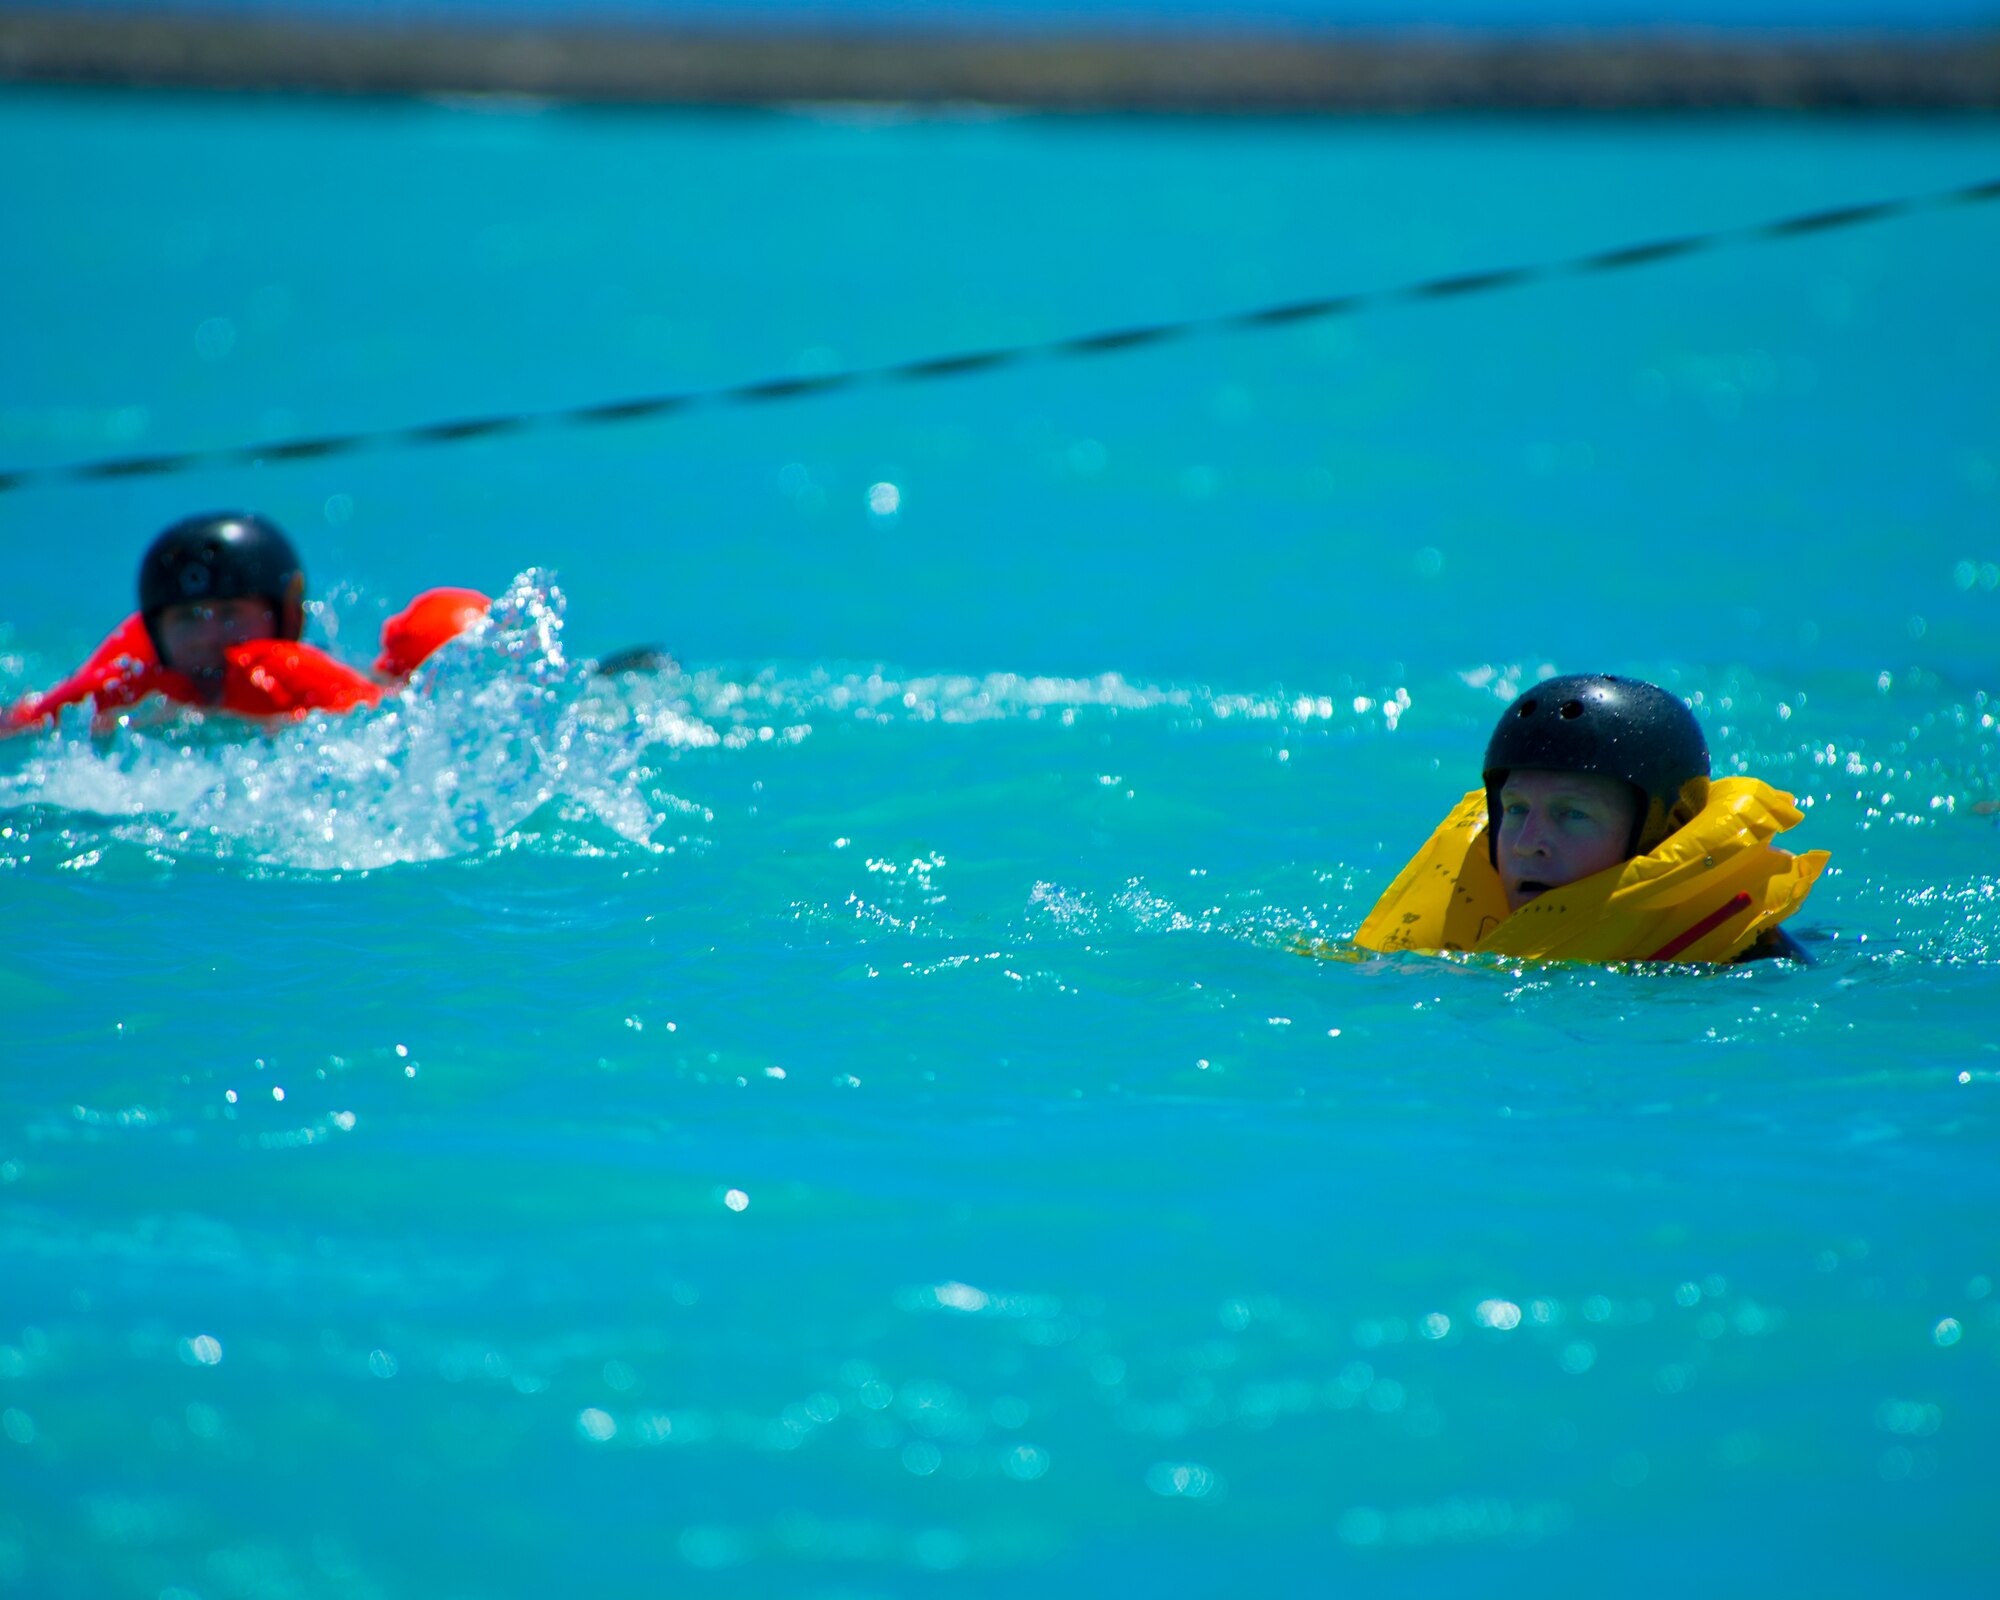 Lt. Col. David Hammer, the director of operations for the 65th Airlift Squadron, swims towards the dock at Hickam Harbor after egressing from a 46person life raft during water survival training on Joint Base Pearl Harbor-Hickam, Hawaii, March 23, 2015. The water survival training is a triennial requirement for all aircrew. (U.S. Air Force photo by Tech. Sgt. Aaron Oelrich/Released)  